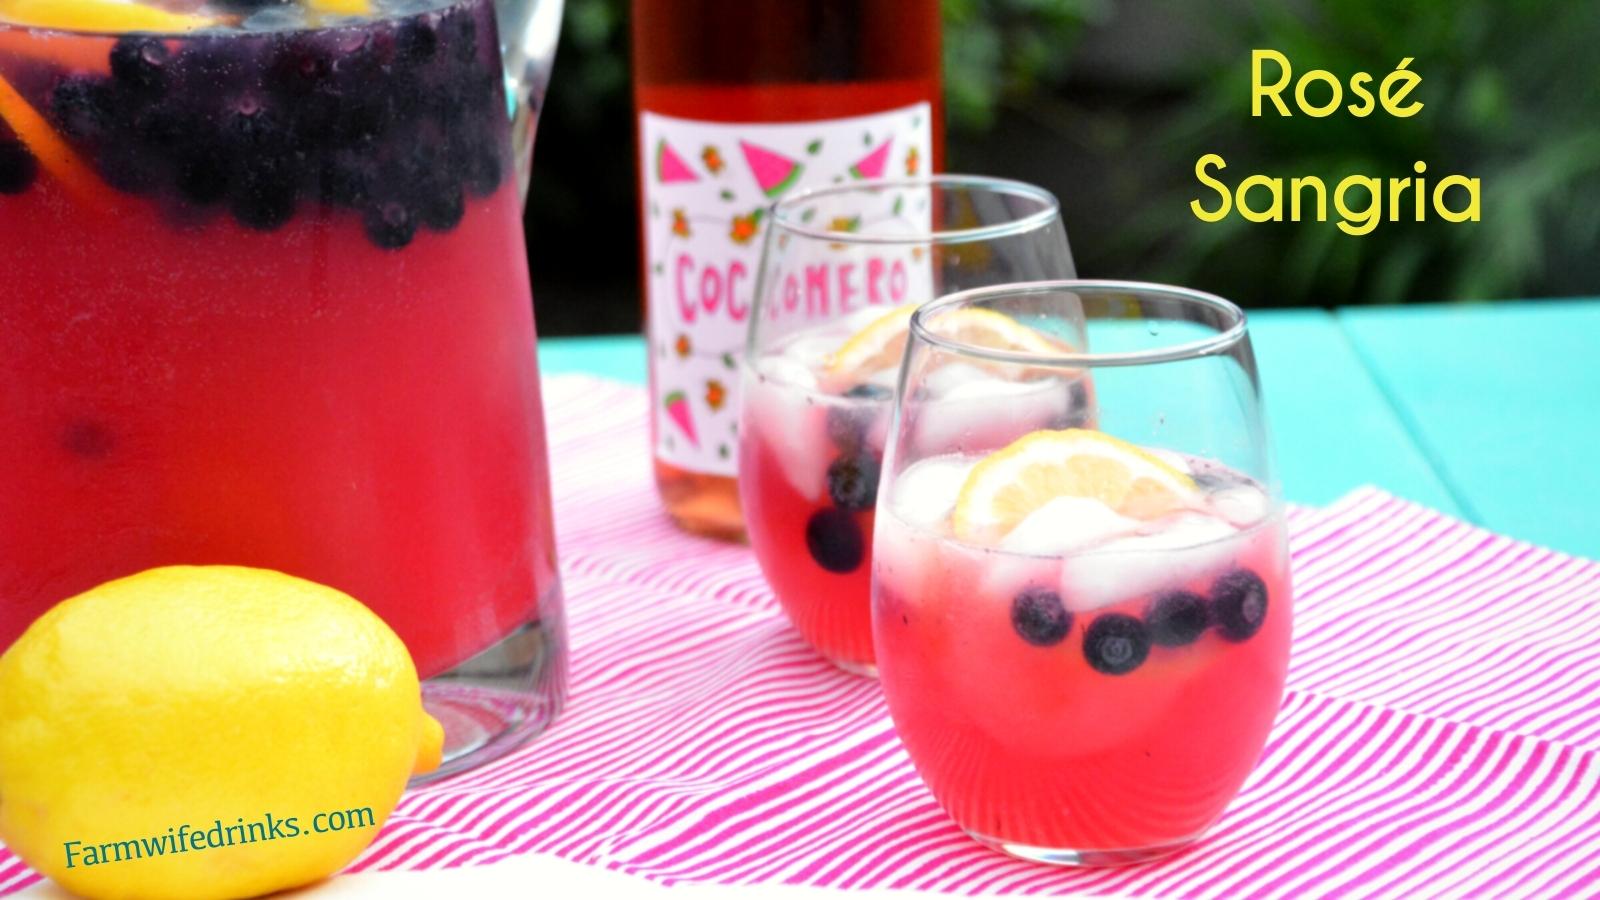 Rosé lovers will lose their minds over this rose lemonade sangria. Pretty as a picture with blueberries and lemons in the pink wine spritzer.